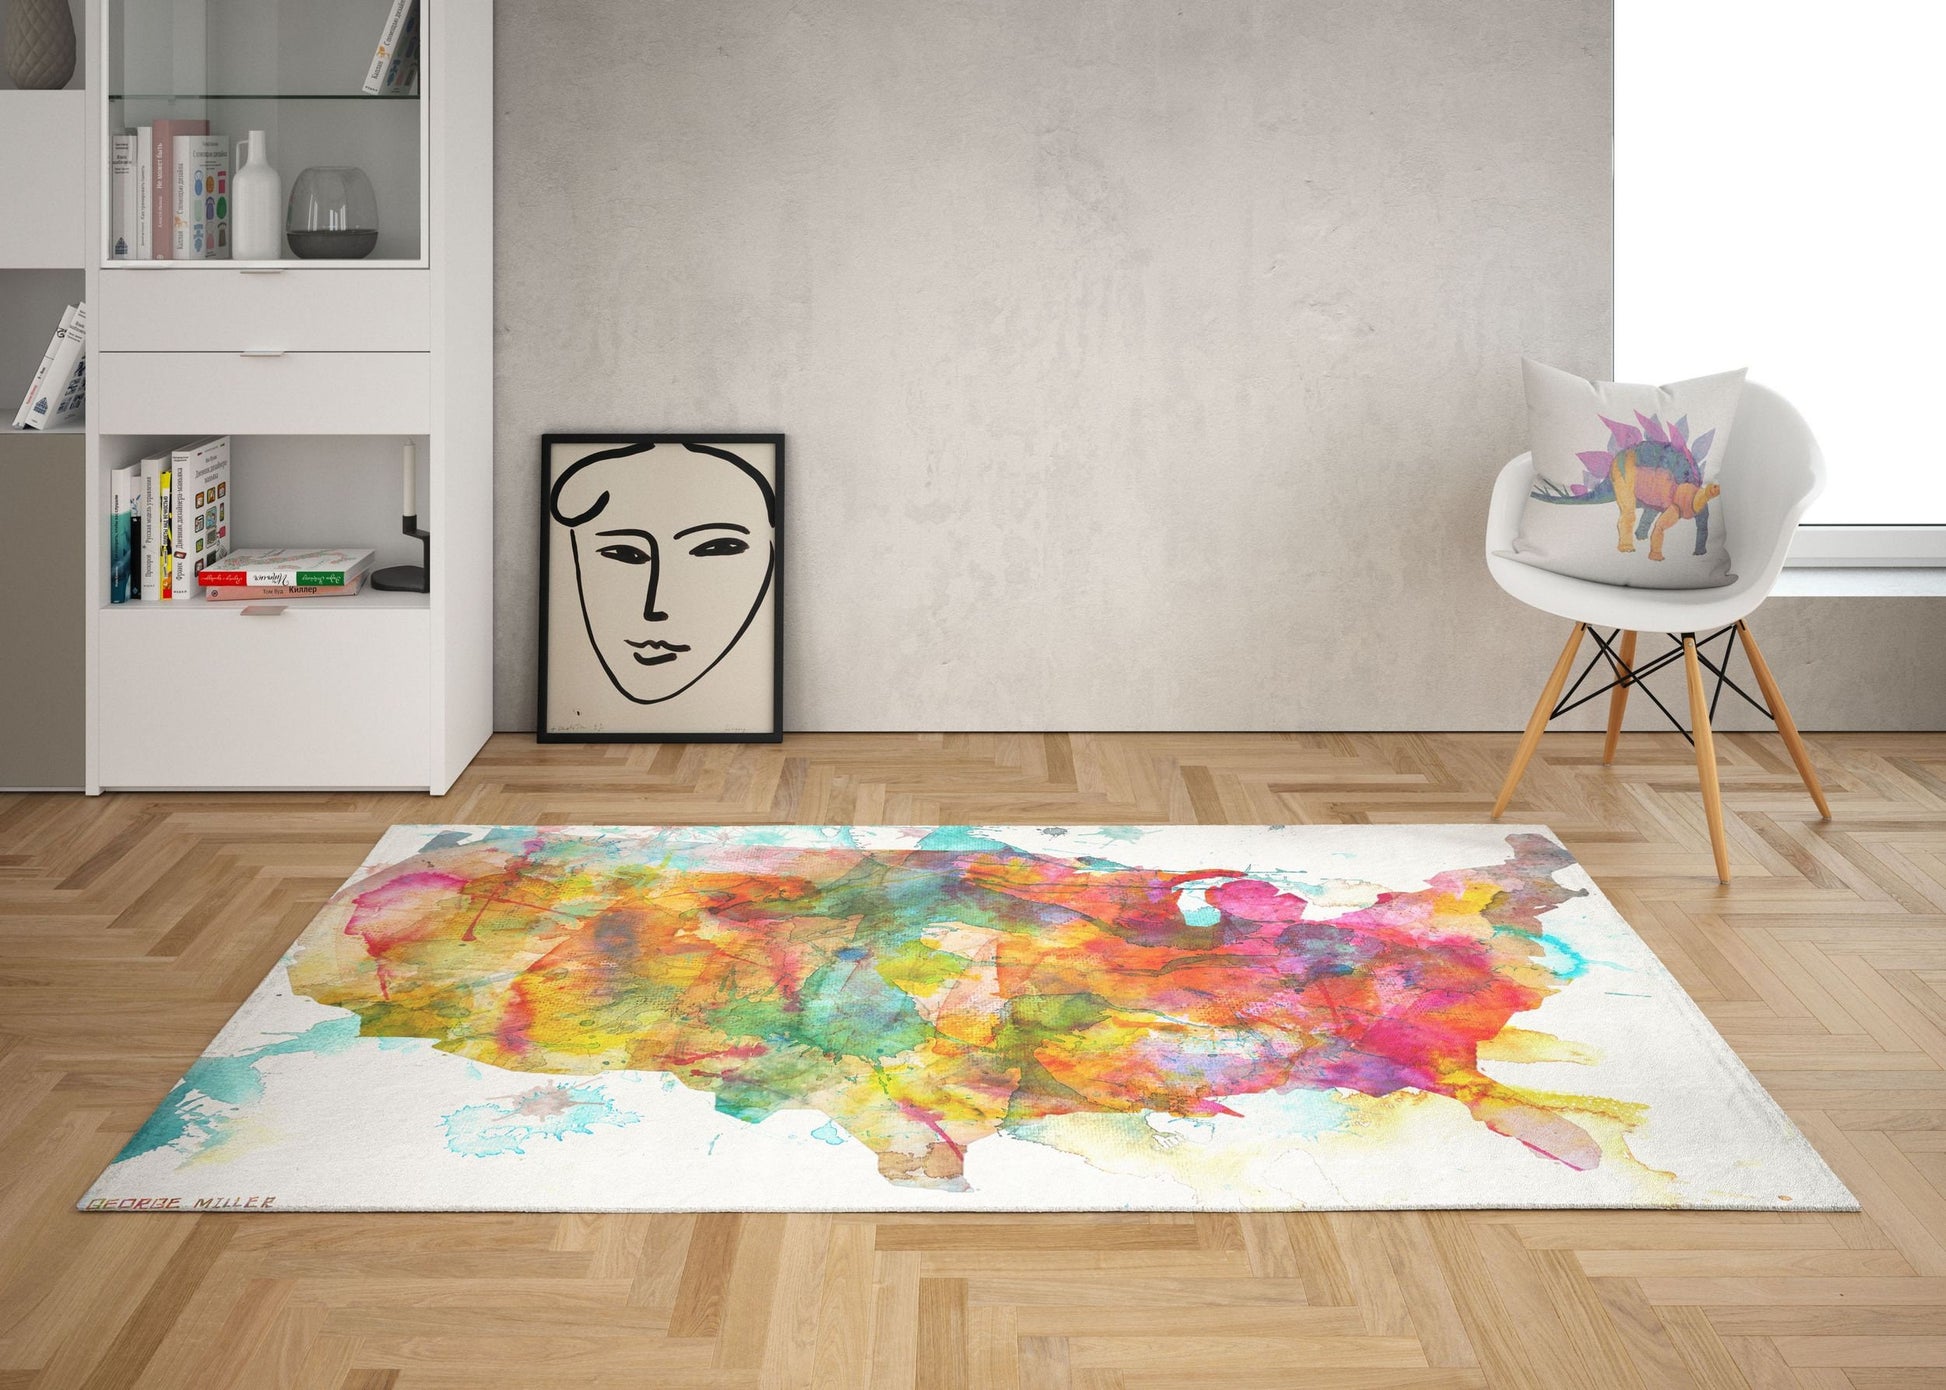 Watercolor Area Rug, Large Rug, Thick Carpet, Rectangle Area Rug, Colorful Rug, United States Map, Contemporary Rug, Floor Rugs, Made In Usa